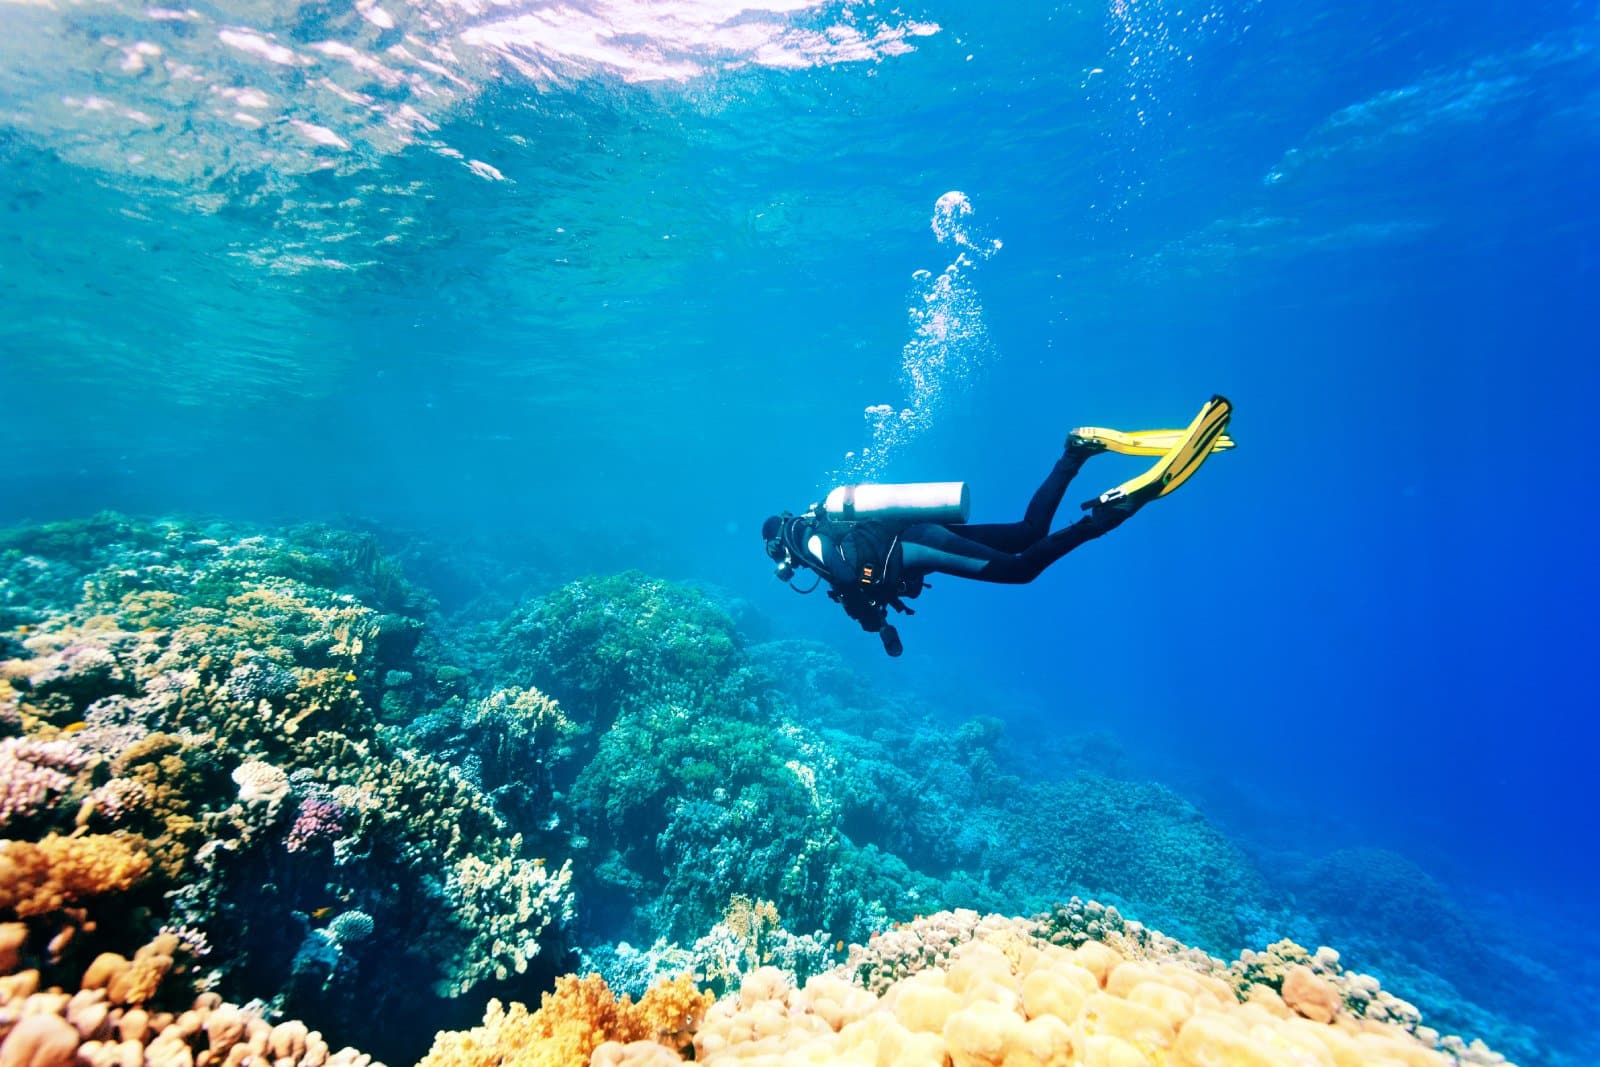 <p class="wp-caption-text">Image Credit: Shutterstock / Sergiy Zavgorodny</p>  <p><span>Choosing the right place to learn scuba diving is pivotal, as it influences not just your ability to master diving techniques but also your overall enthusiasm for underwater exploration. The ideal spots for beginner divers combine clear waters, rich marine biodiversity, and reputable dive centers offering certifications like PADI. These locations ensure a learner’s first foray into the underwater world is both safe and mesmerizing.</span></p> <p><span>From the coral-rich ecosystems of the Great Barrier Reef to Southeast Asia’s vibrant underwater life and the Galapagos Islands’ unique diving experiences, each destination provides a unique backdrop for diving education. Such places promise excellent visibility and diverse marine life and adhere to the highest diving instruction and safety standards.</span></p> <p><span>Selecting a premier diving destination like Koh Samui in Thailand or Bonaire in the Caribbean can significantly enhance learning. These locations offer the perfect conditions for beginners—calm waters, extensive underwater fauna, and professional diving schools.</span></p> <p><span>Furthermore, diving in these iconic spots allows new divers to immerse themselves in some of the most spectacular underwater environments on the planet, turning the learning experience into an unforgettable adventure. Whether it’s gliding past colorful coral reefs, exploring historical wrecks, or encountering majestic sea creatures, the right diving location sets the stage for a lifelong passion for diving, equipped with the skills and confidence to explore the oceans of the world.</span></p>